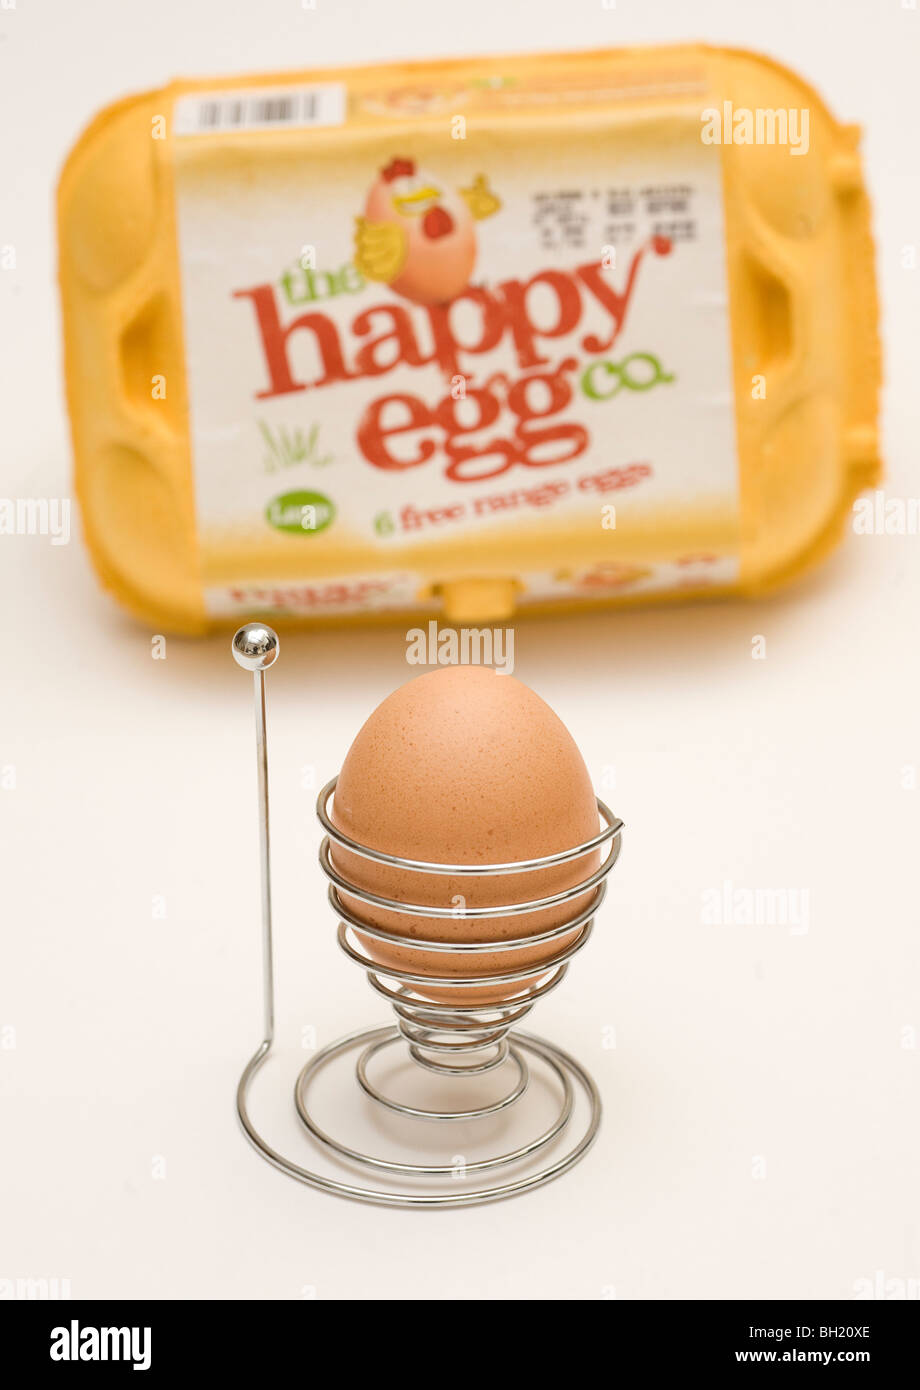 A Free Range Egg and egg box. Picture by James Boardman Stock Photo